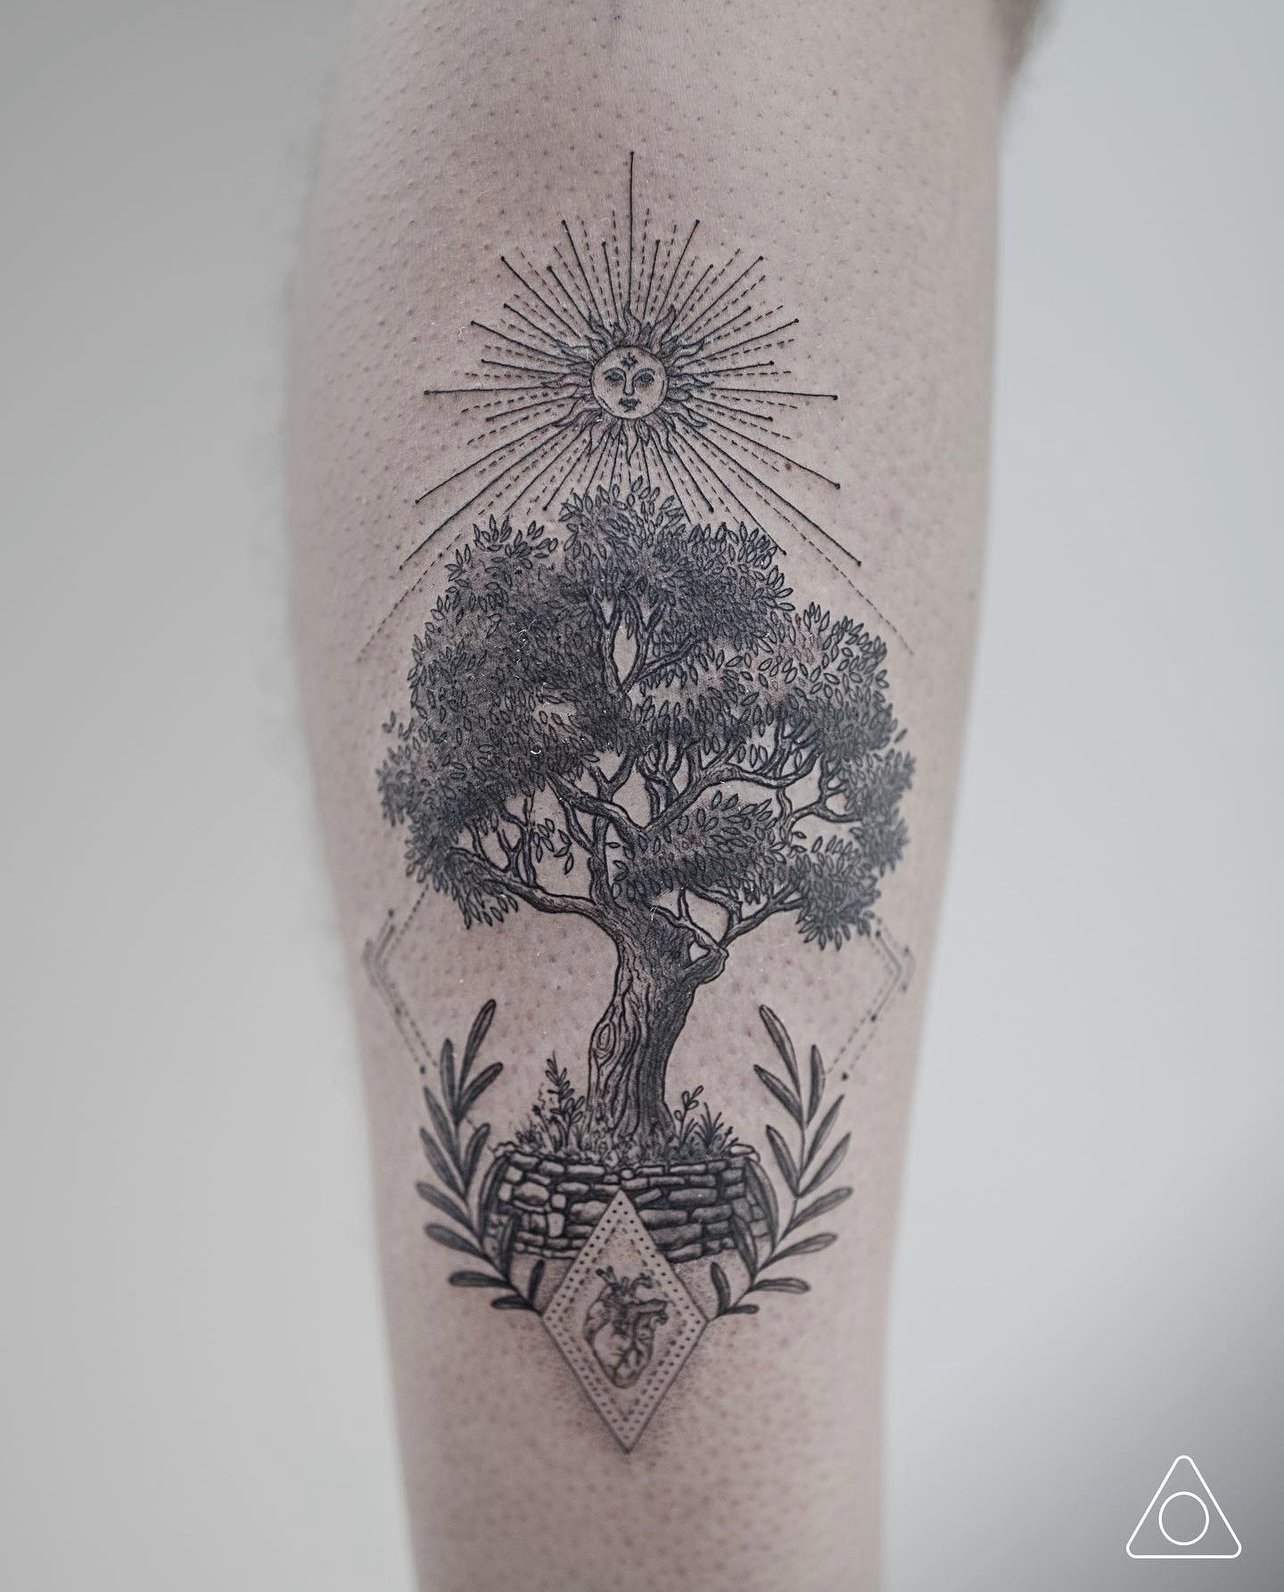 33 Mountain Tattoo Ideas for Every Aesthetic